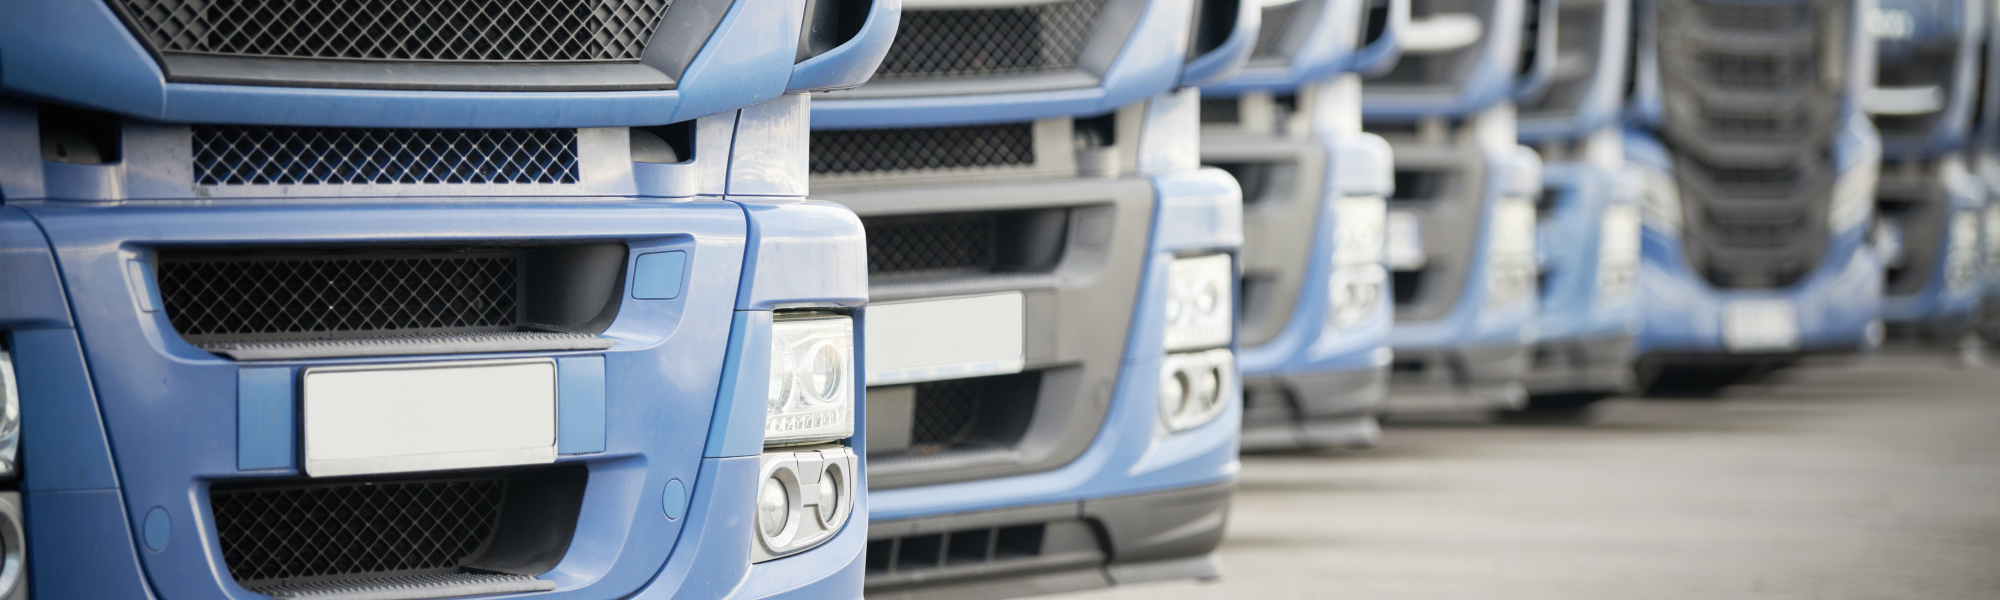 IRU’s new European truck driver shortage report has found that over half of operators are unable to expand their business due to the shortage of drivers.